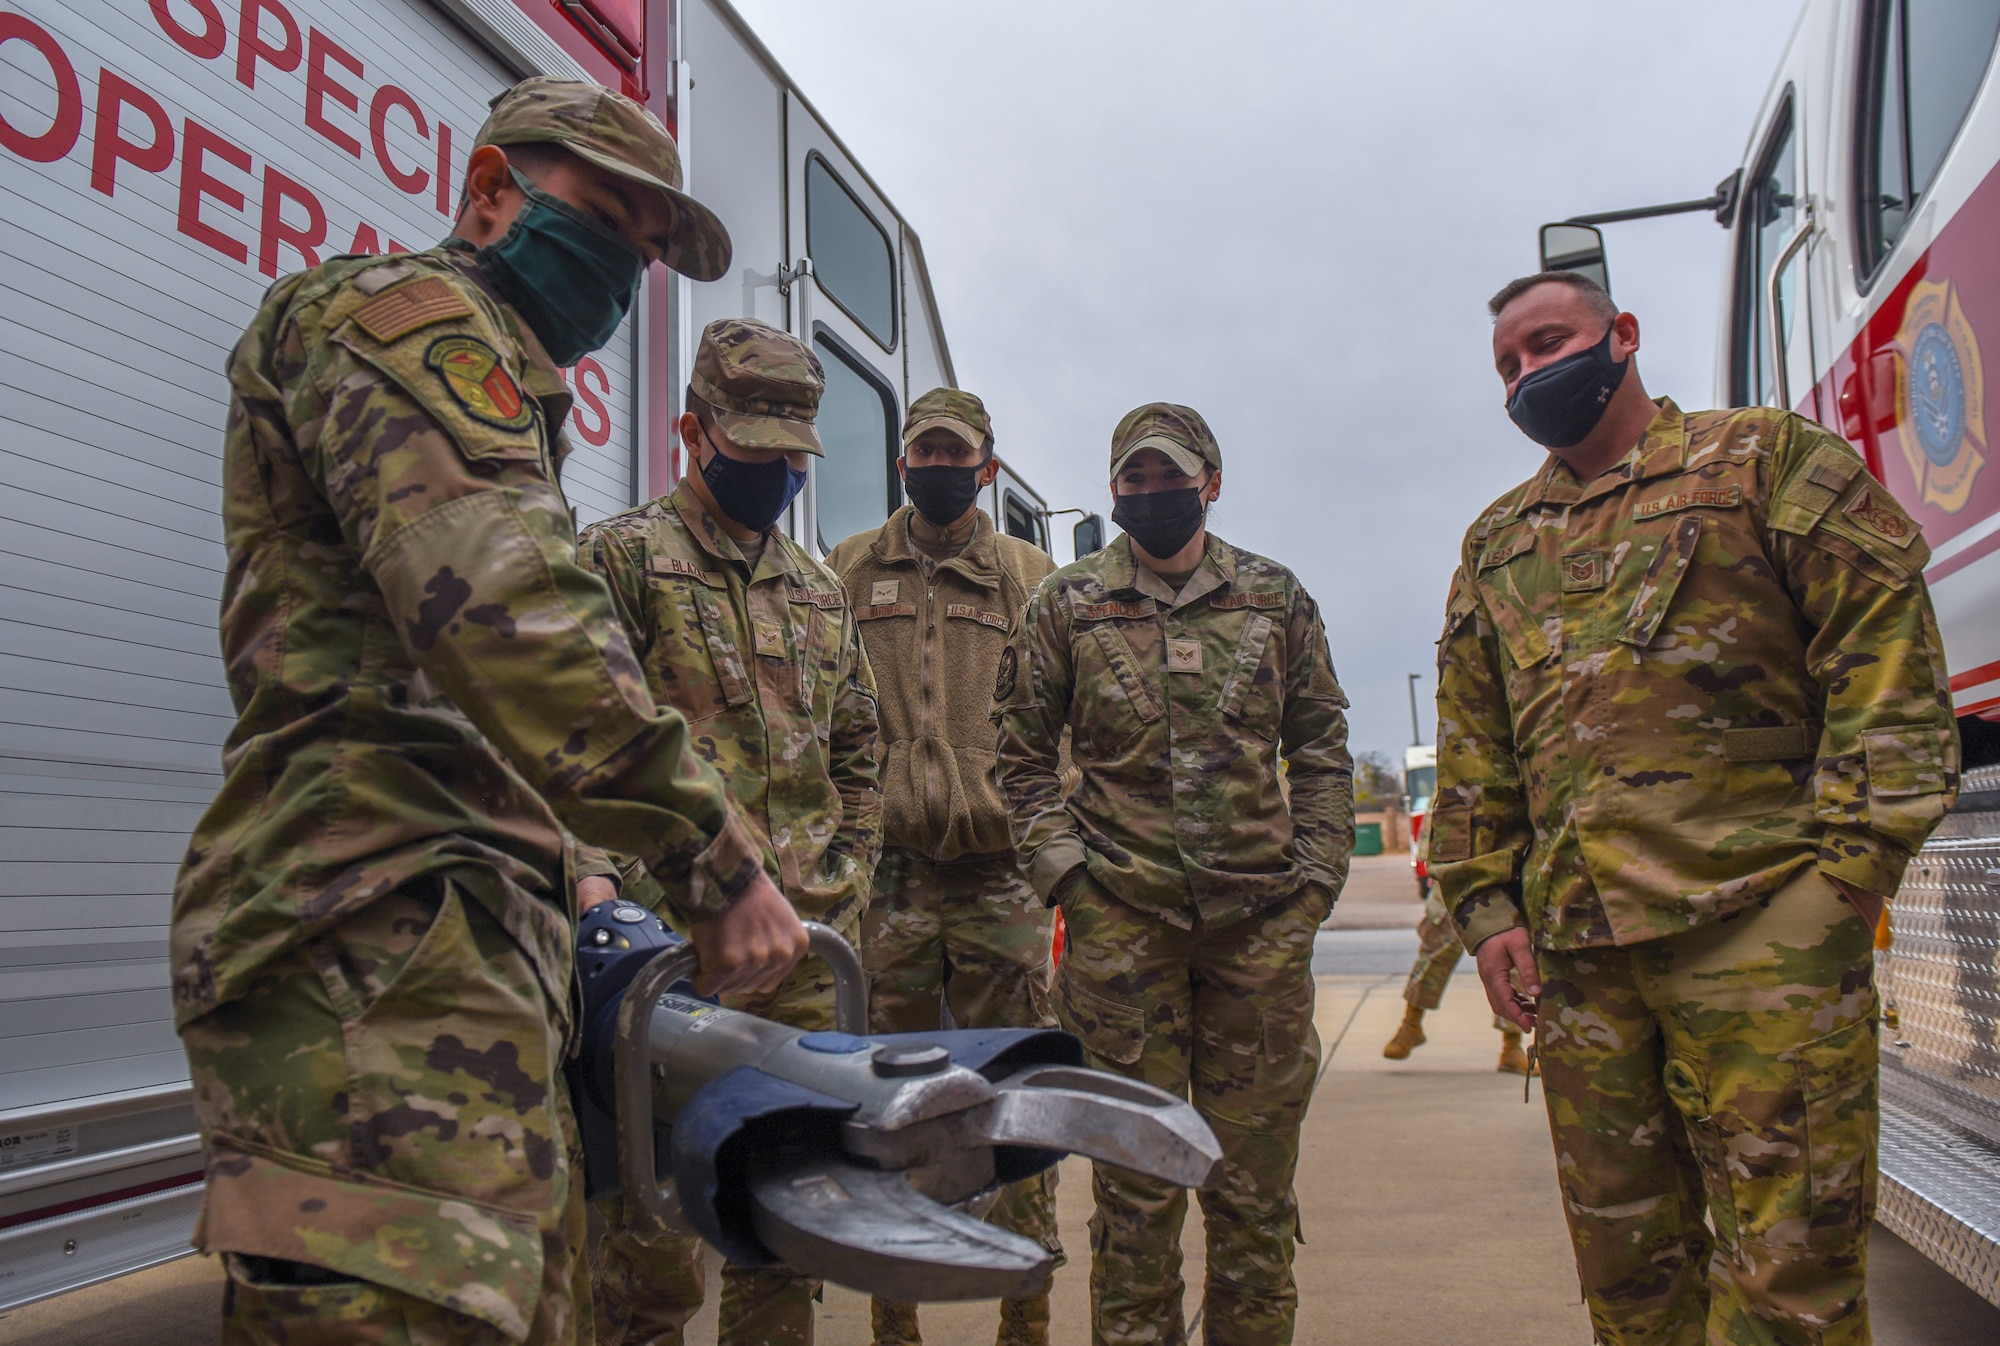 A group of Airmen participate in a demonstration.